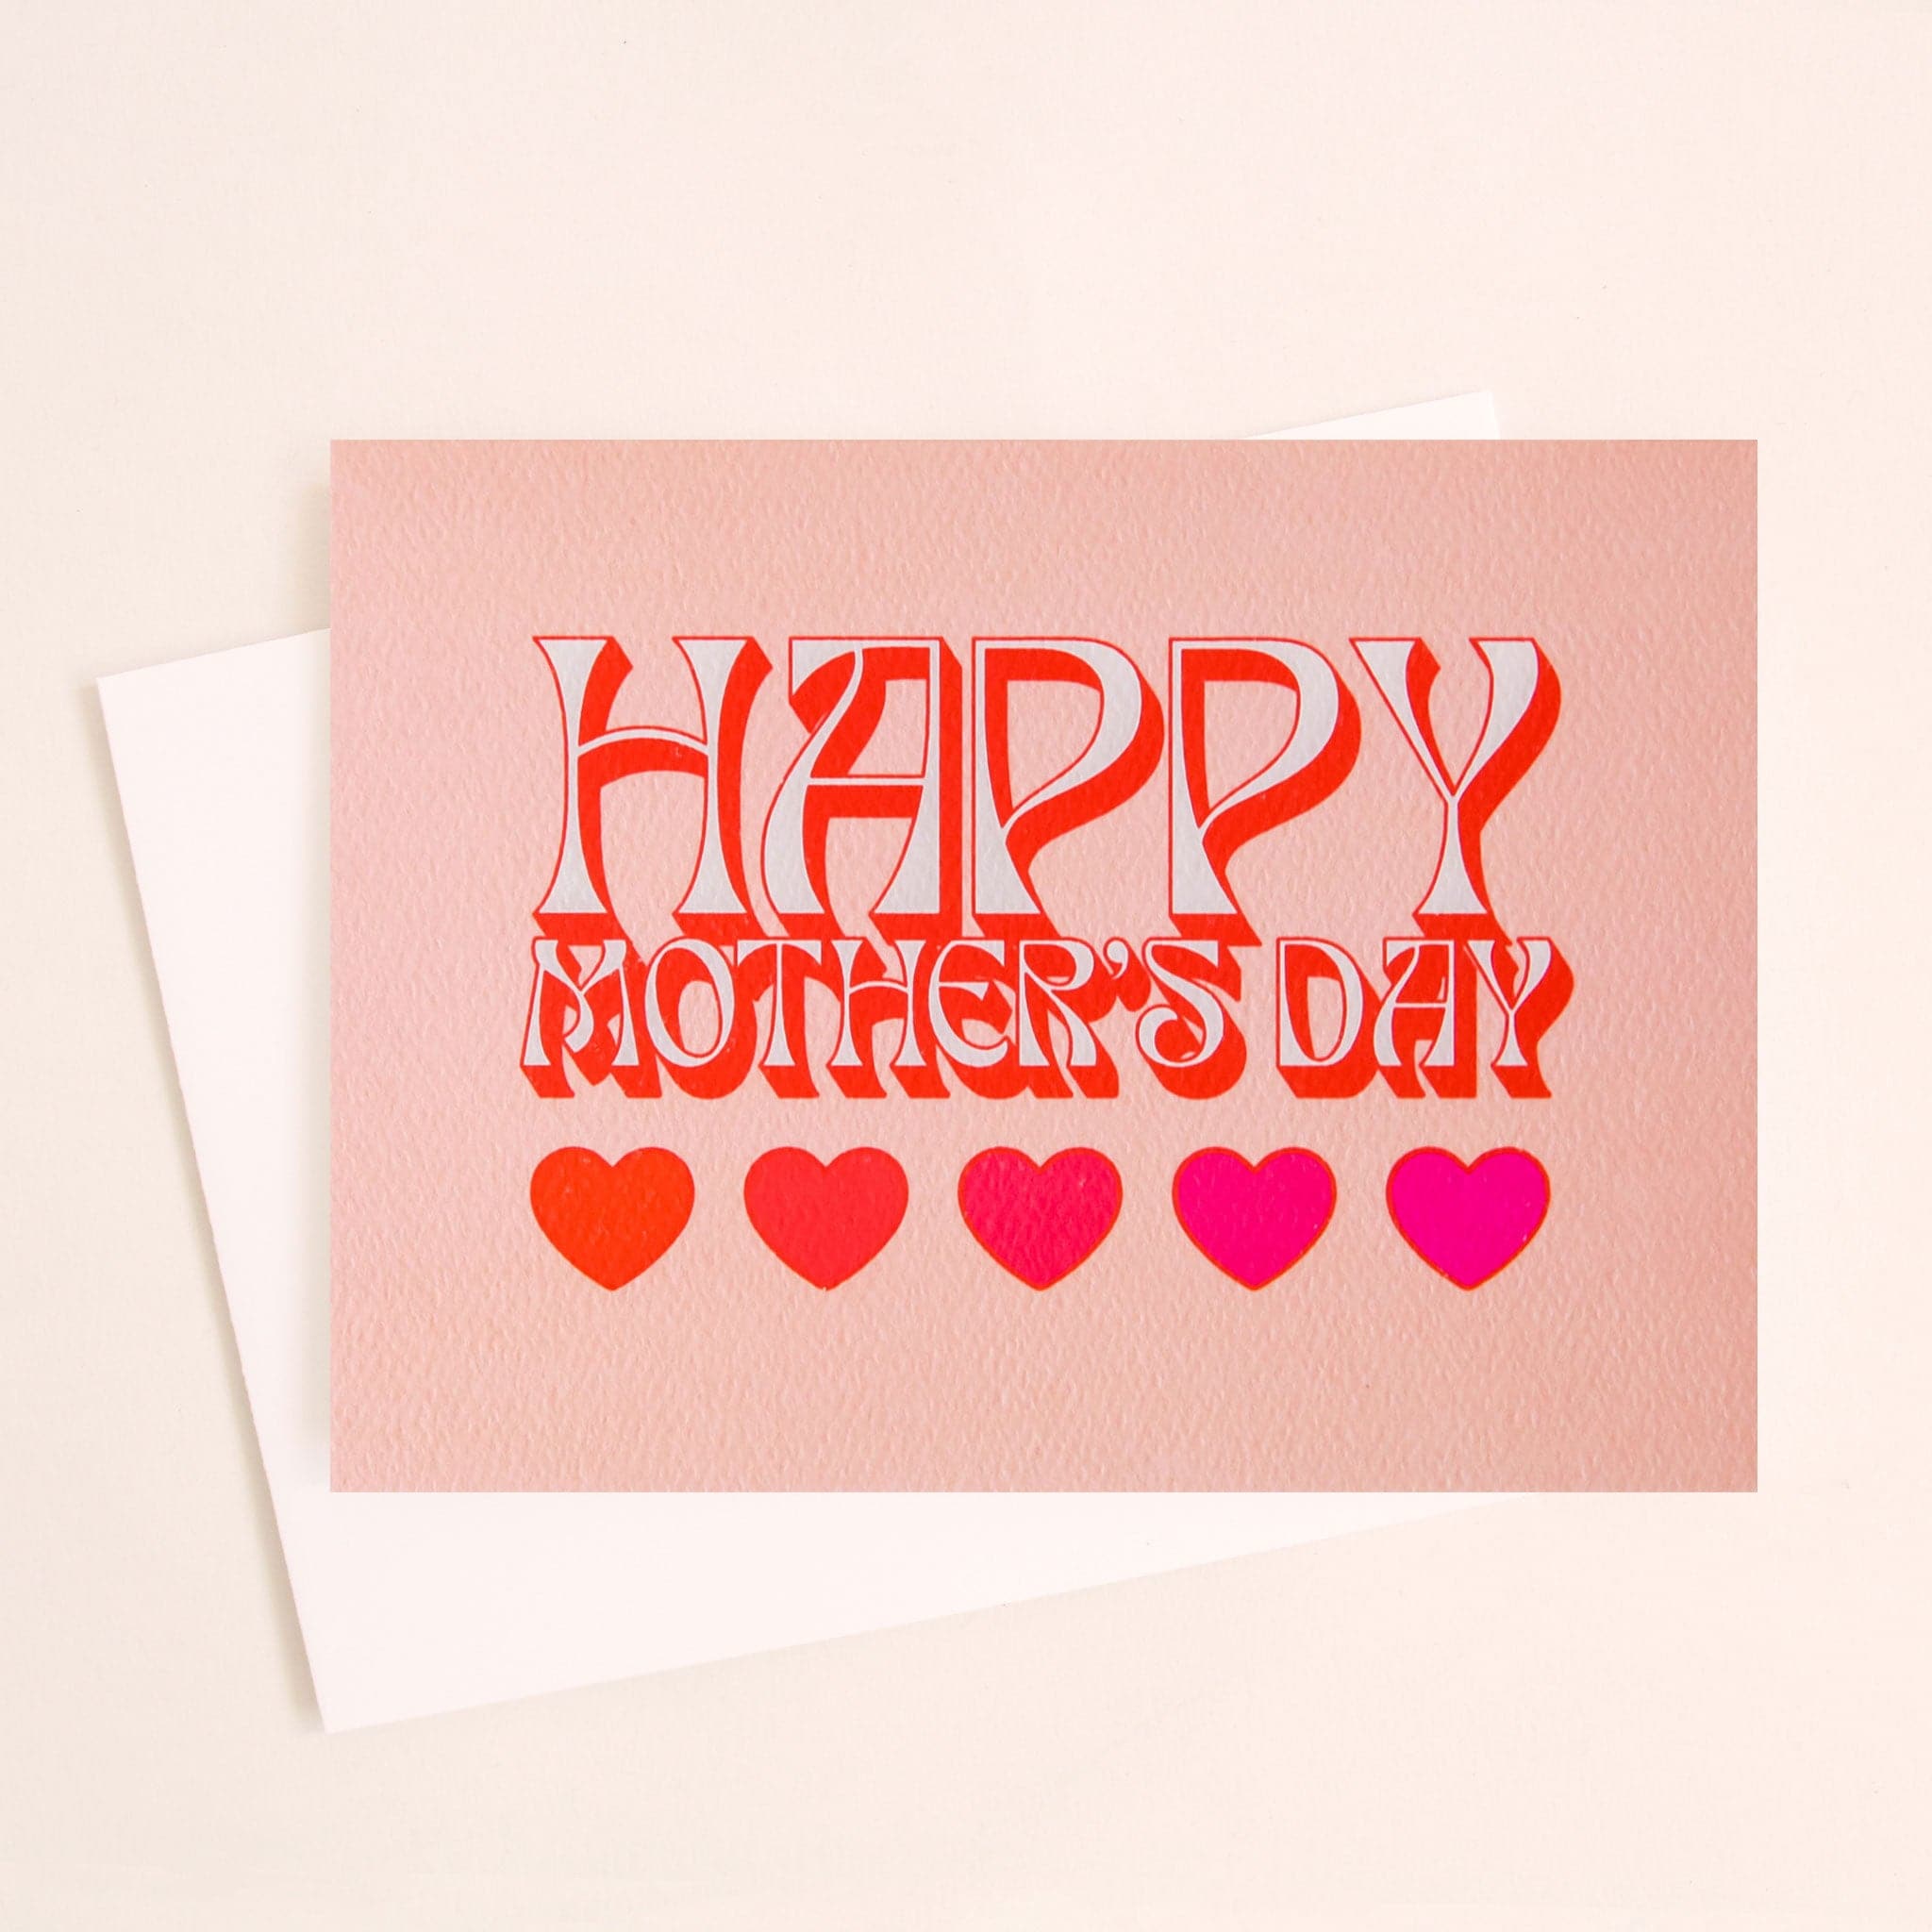 Soft pink card that reads &#39;Happy Mother&#39;s Day&#39; in retro white lettering with a red shadow. Below is a row of five hearts in various reds and pinks. The card is accompanied by a solid white envelope.